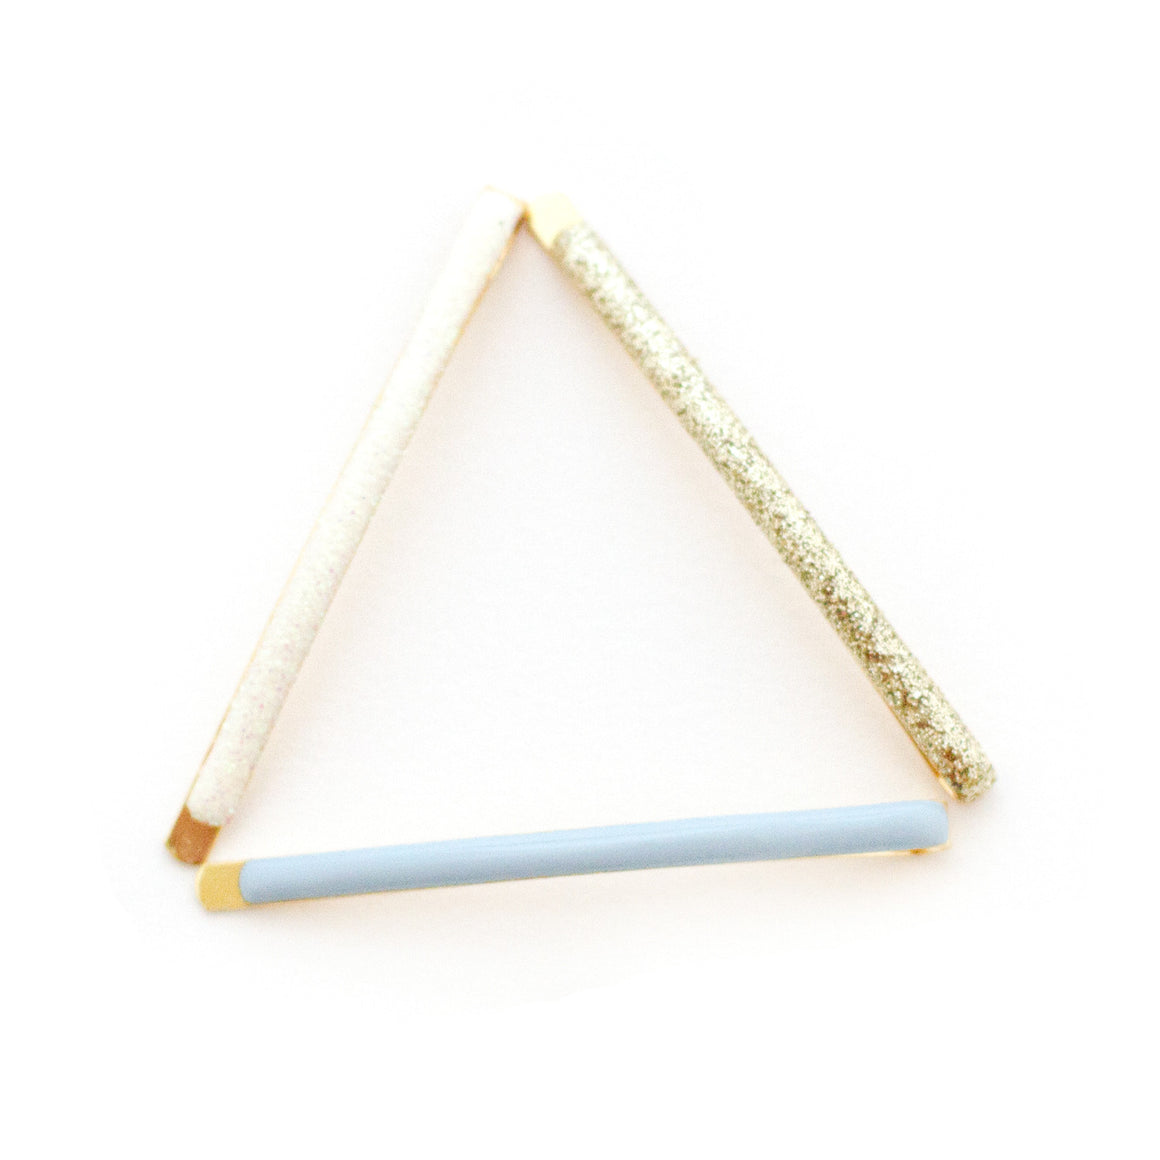 the dream date bobby pin package features gold iridescent and blue enamel glitter hair pins